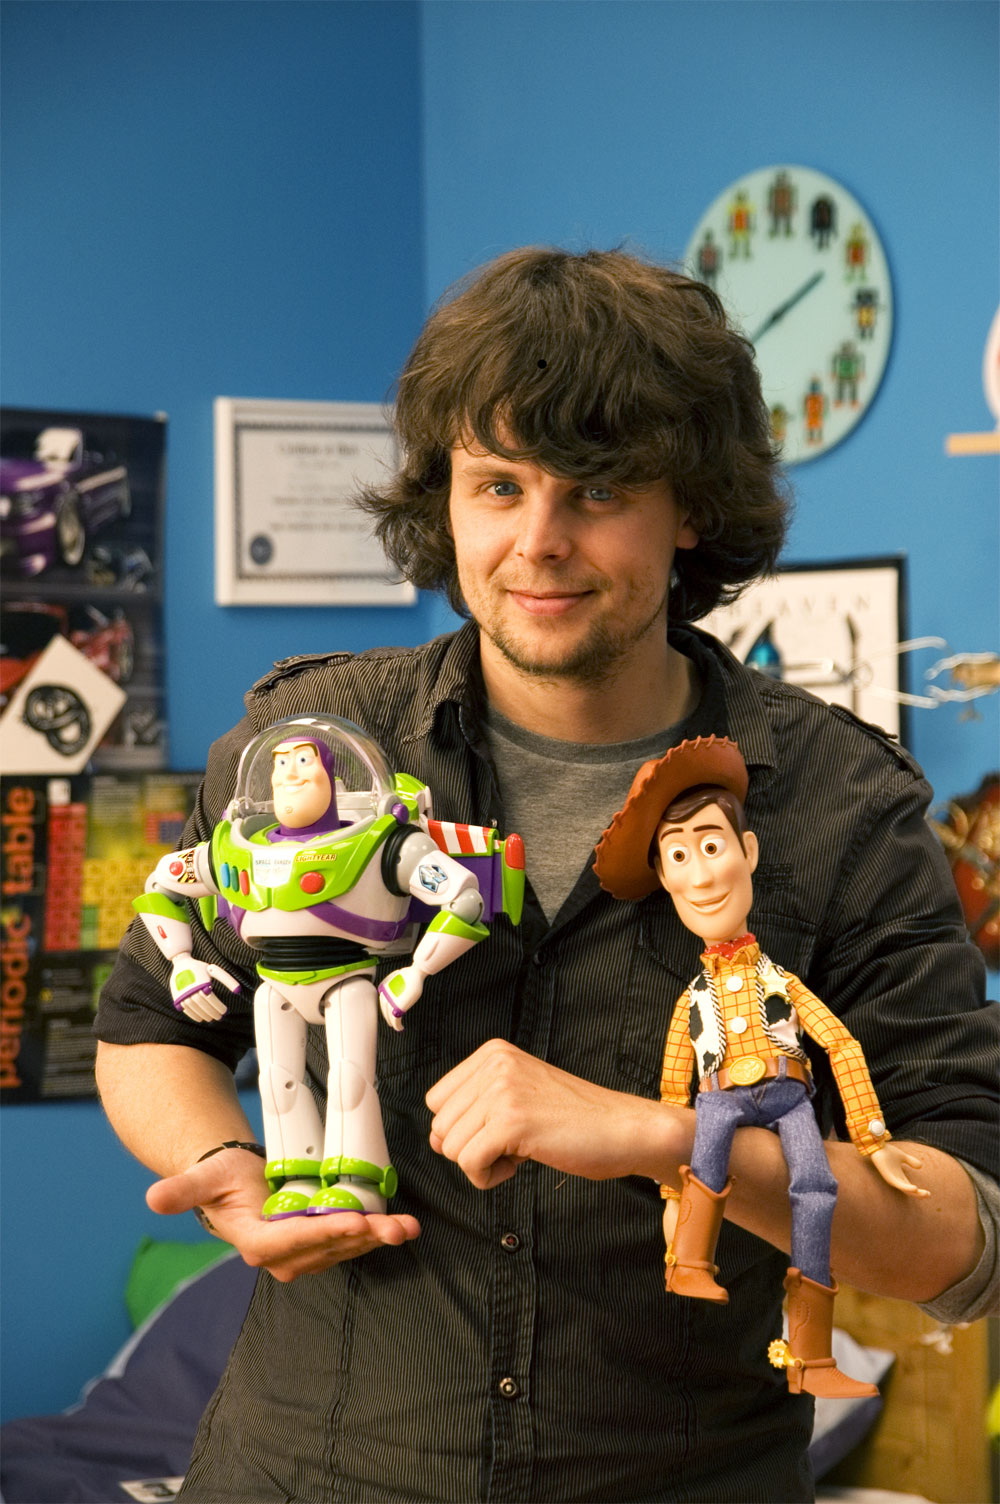 On set of the Sony PSP commercial for Toy Story 3